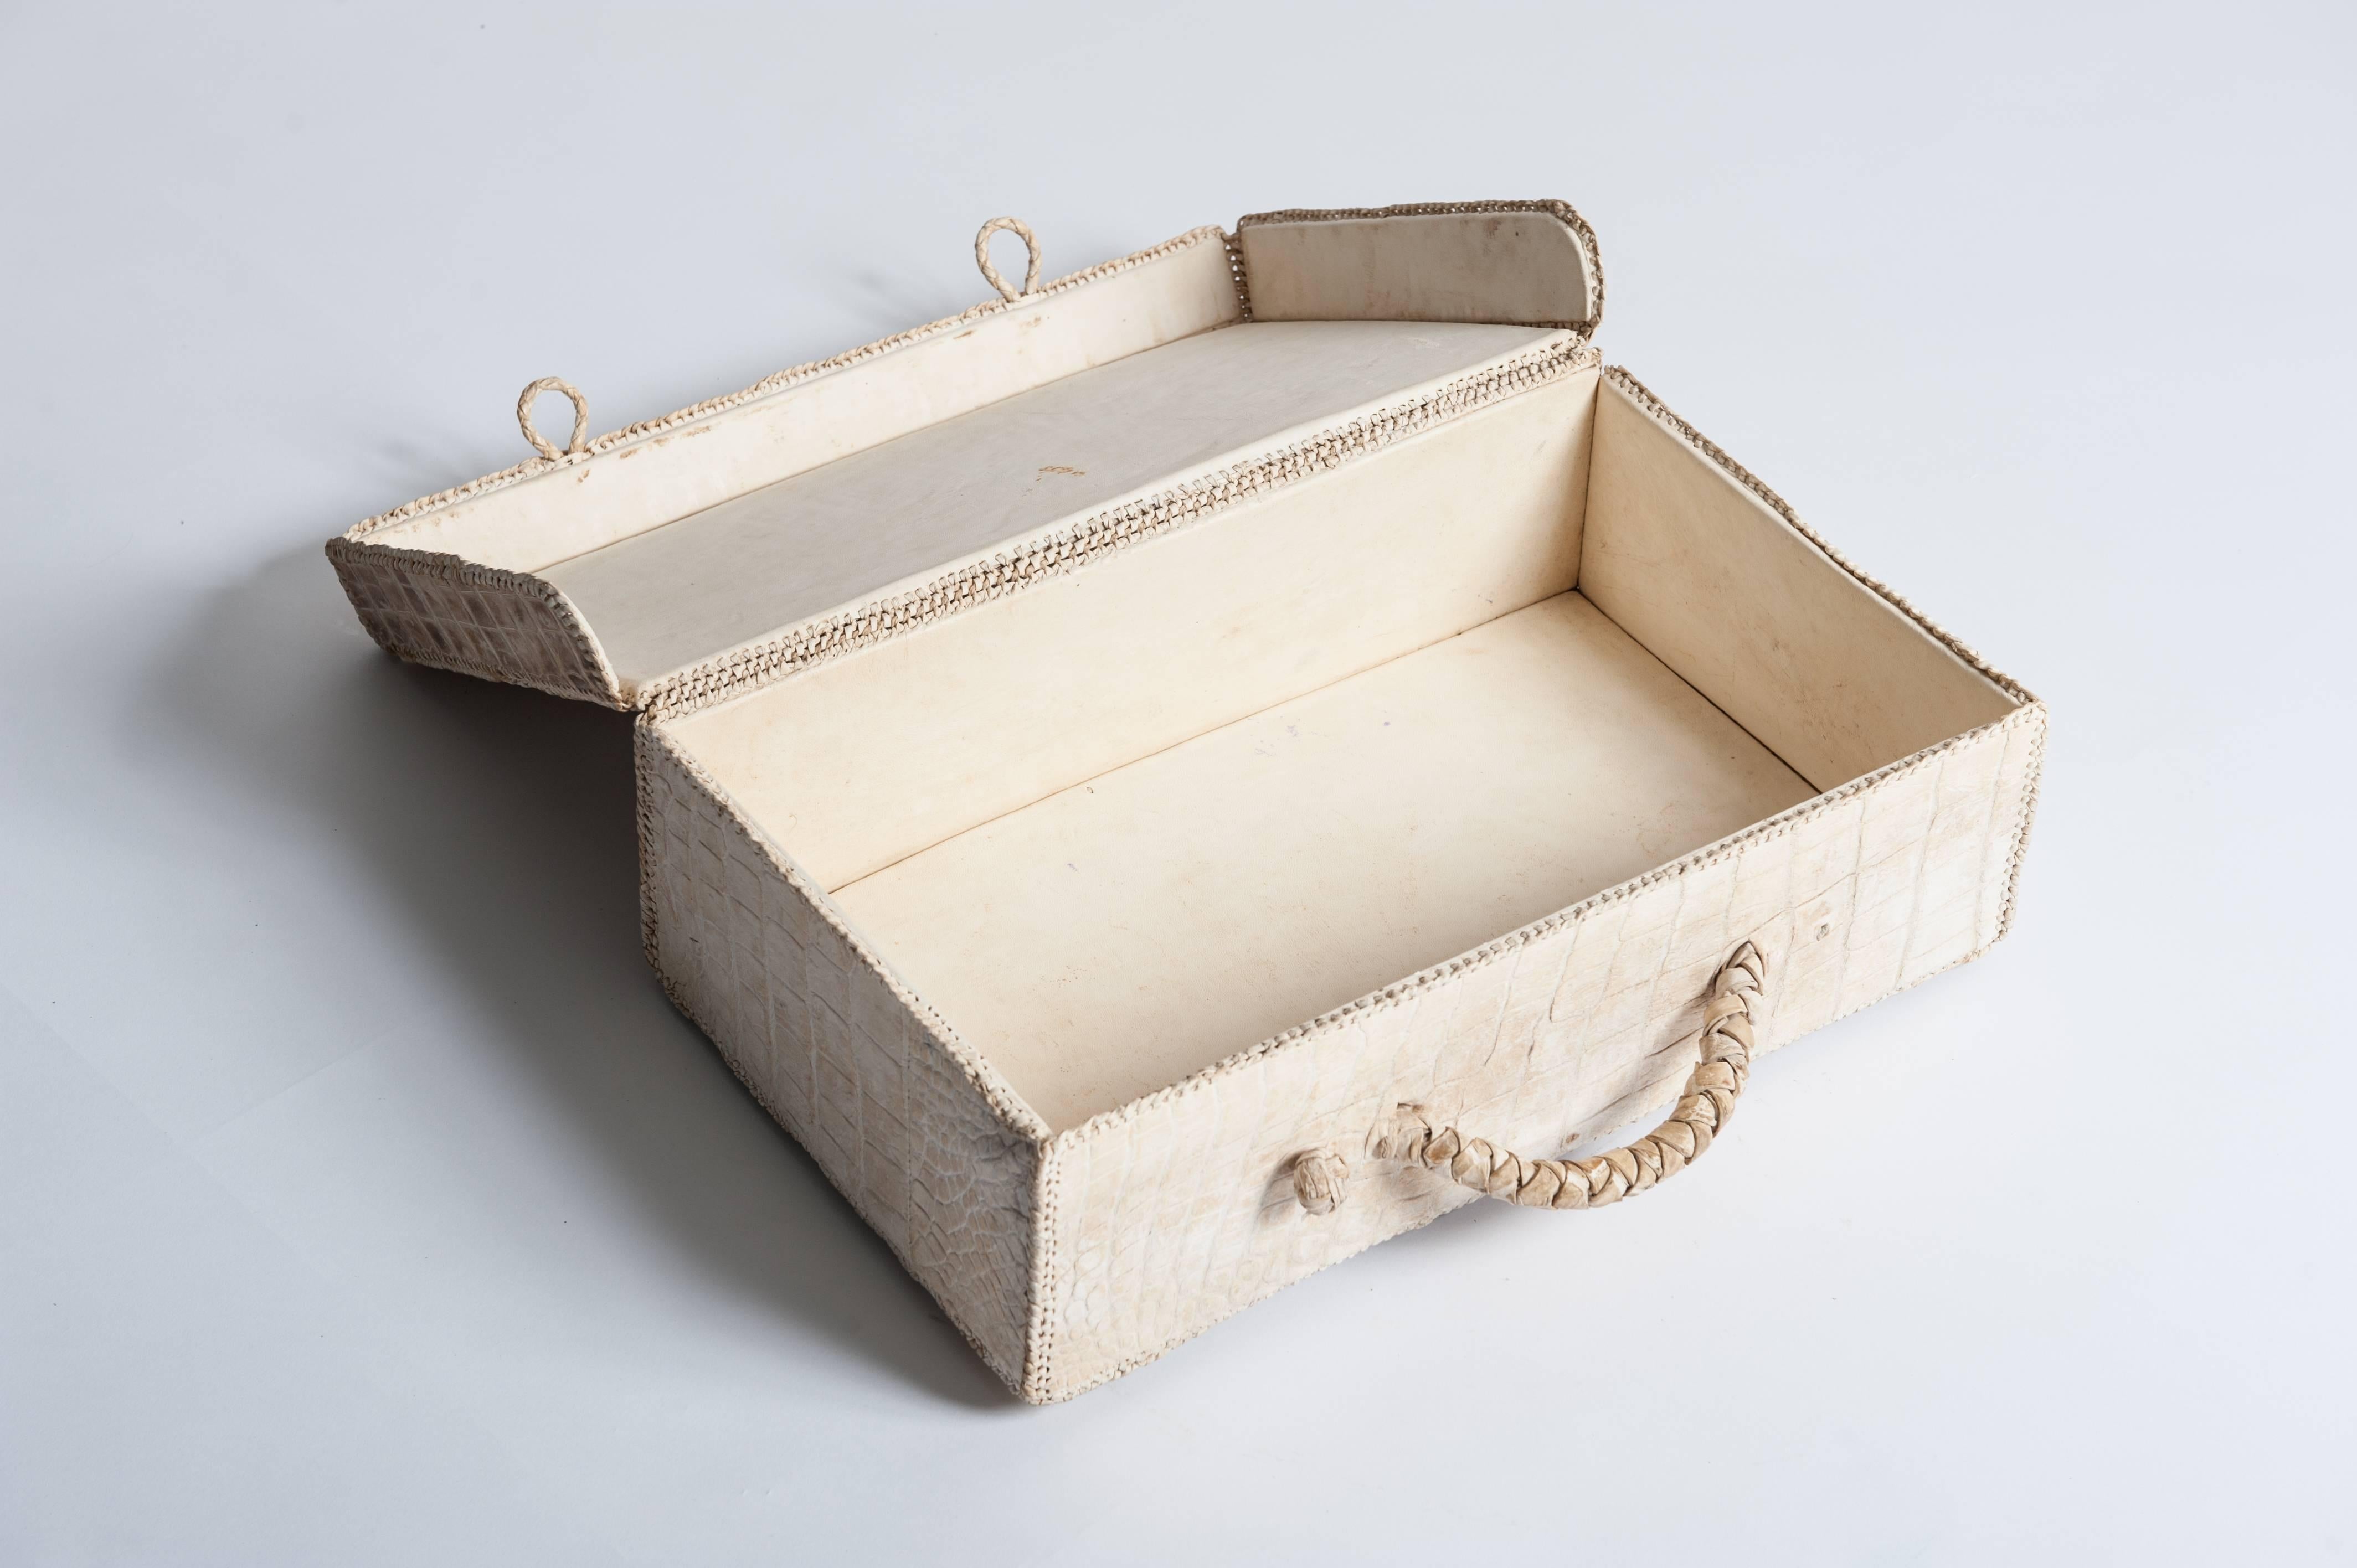 Unique French Art DÉco Picnic Case Creme-White Hornback Croco Leather 1930s In Good Condition For Sale In Salzburg, AT